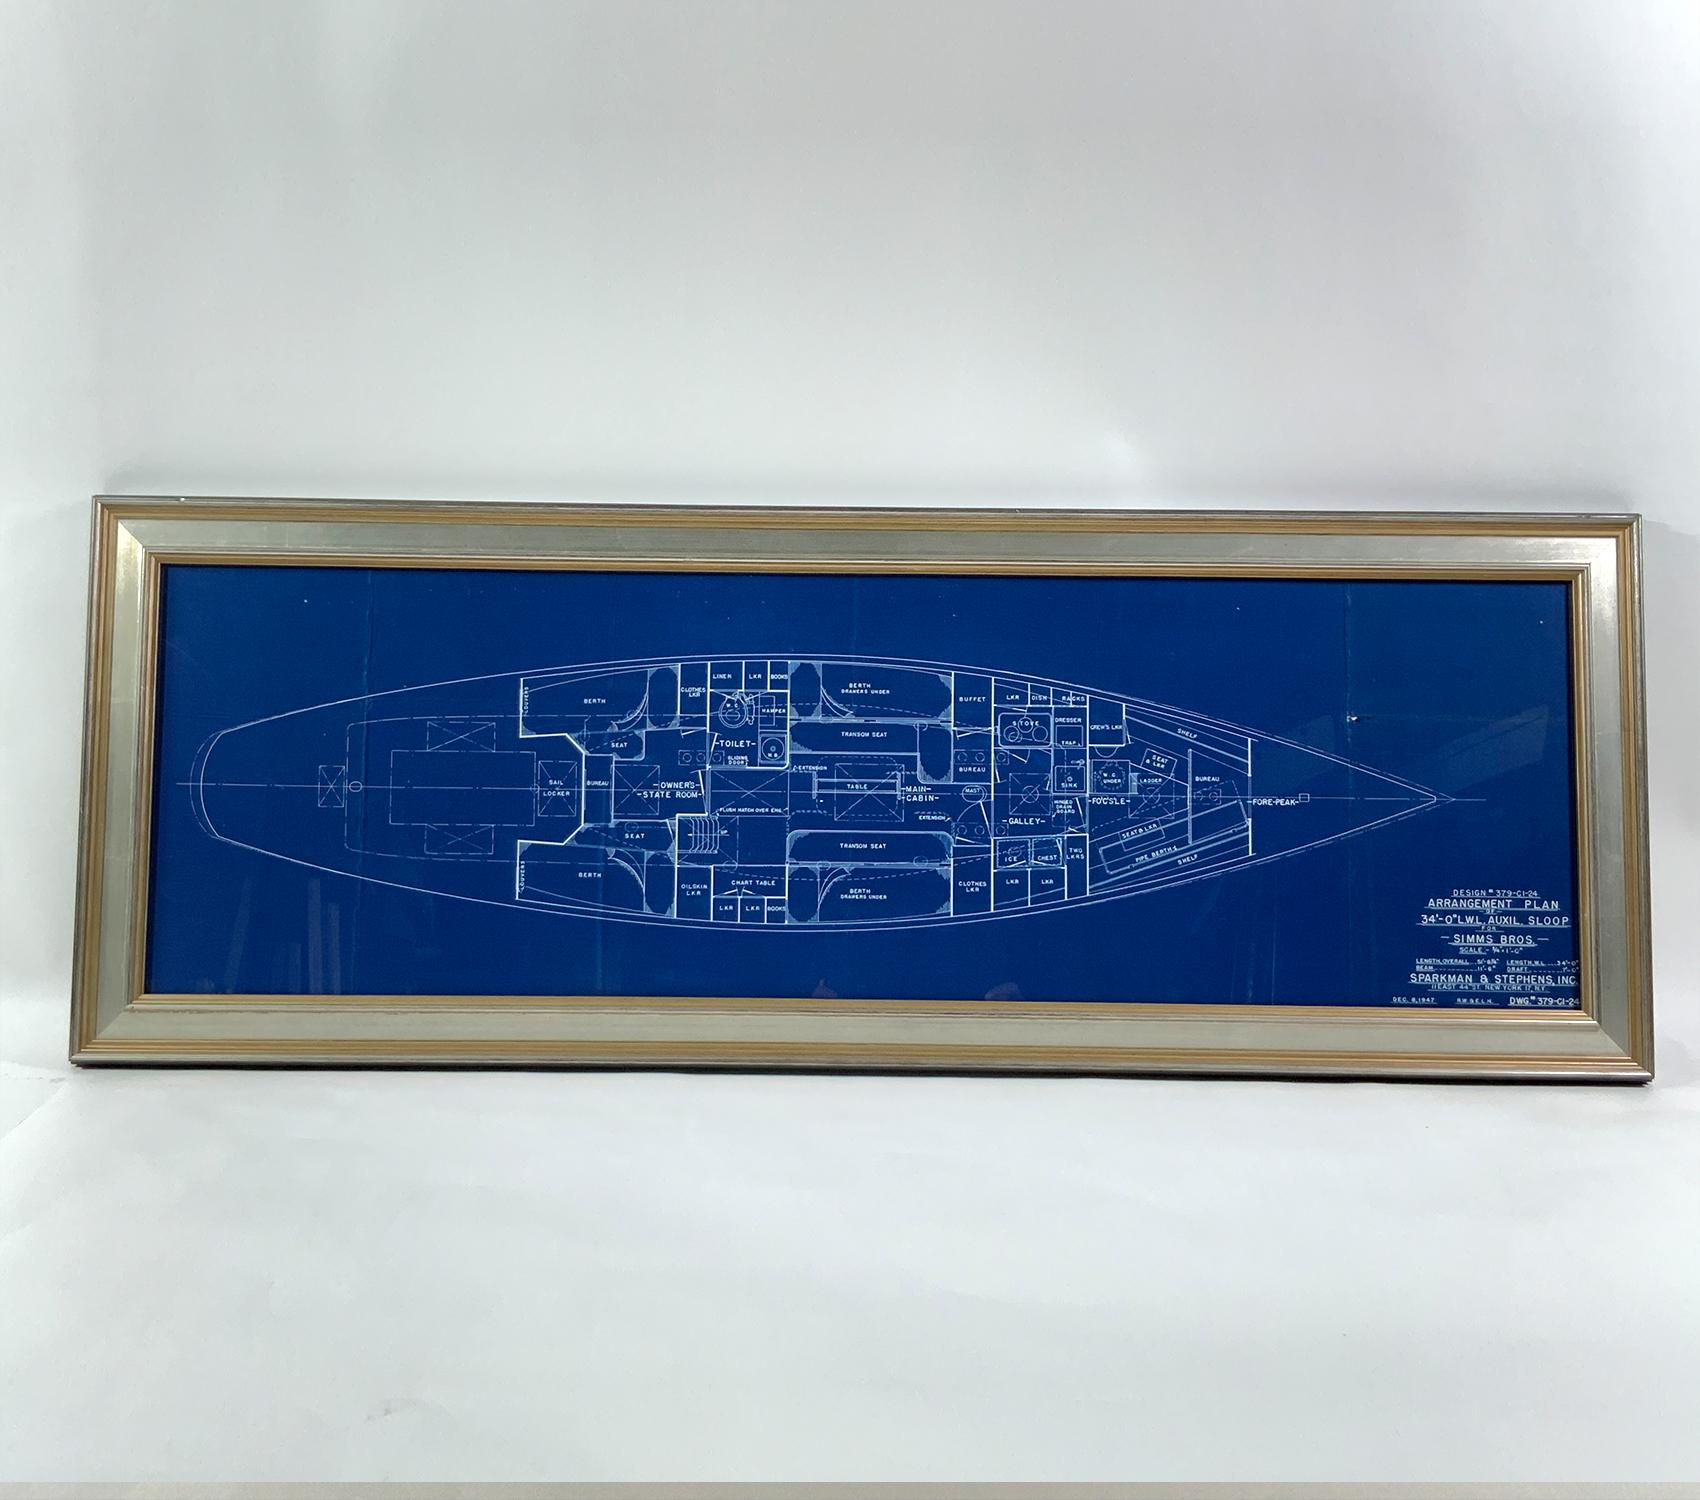 Sparkman and Stevens original yacht blueprint of the Auxiliary Sloop Venture III. Built at Simms Brothers in Dorchester, Mass in 1949. Designed by Olin Stevens and Aage Nielsen. Very historic blueprint here coming from the masters. Legend reads